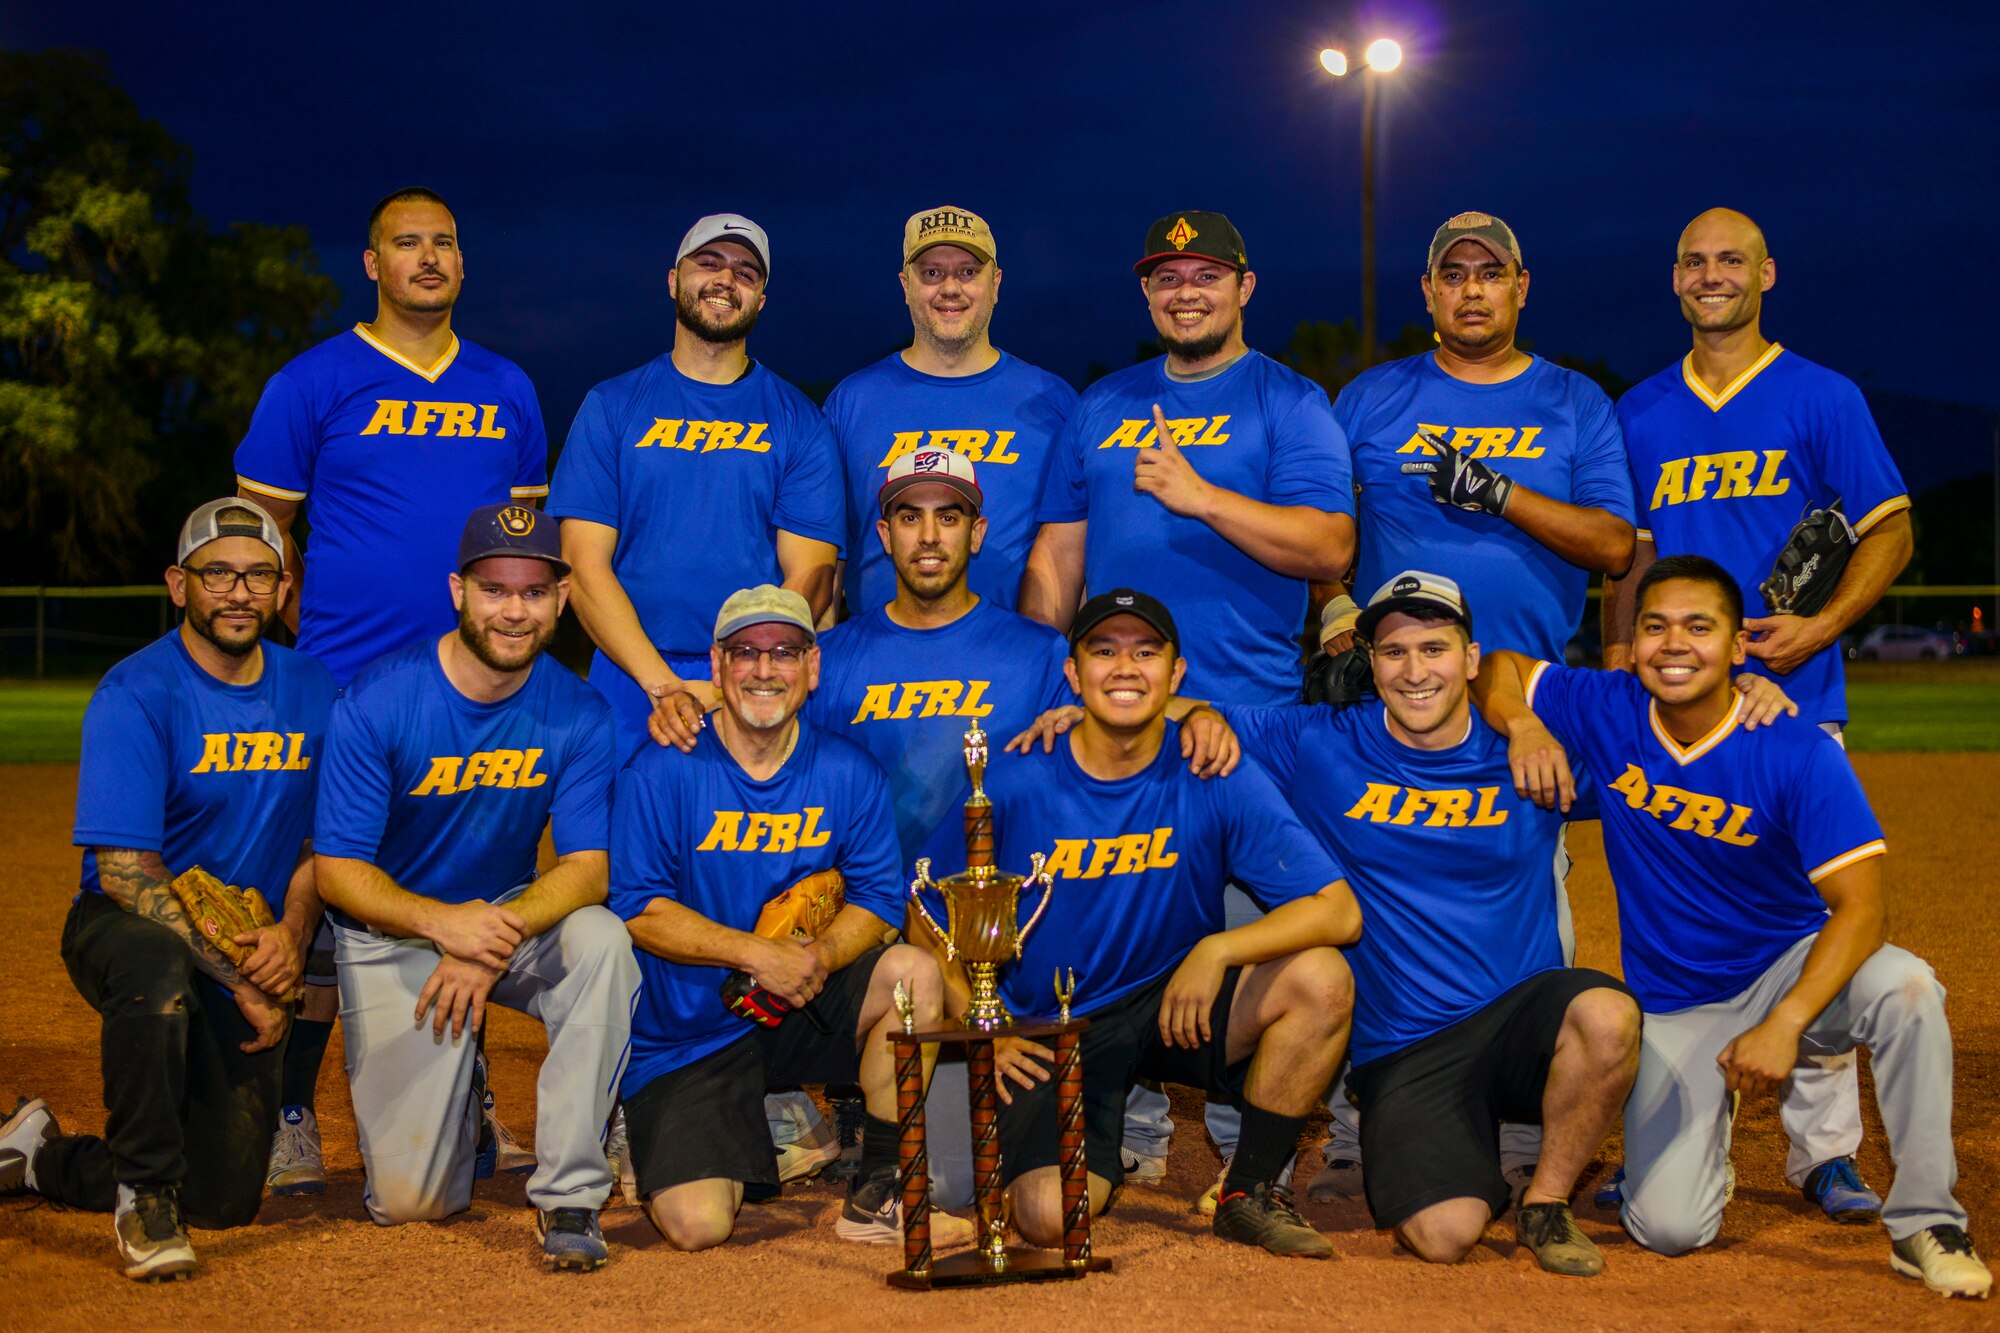 Team AFRL poses for a photo with the 2019 Kirtland Softball Intramural Championship trophy at Kirtland Air Force Base, N.M., August 22, 2019. Team AFRL beat Team SFS for the championship game with a final score of 26-22. (U.S. Air Force photo by Airman 1st Class Austin J. Prisbrey)